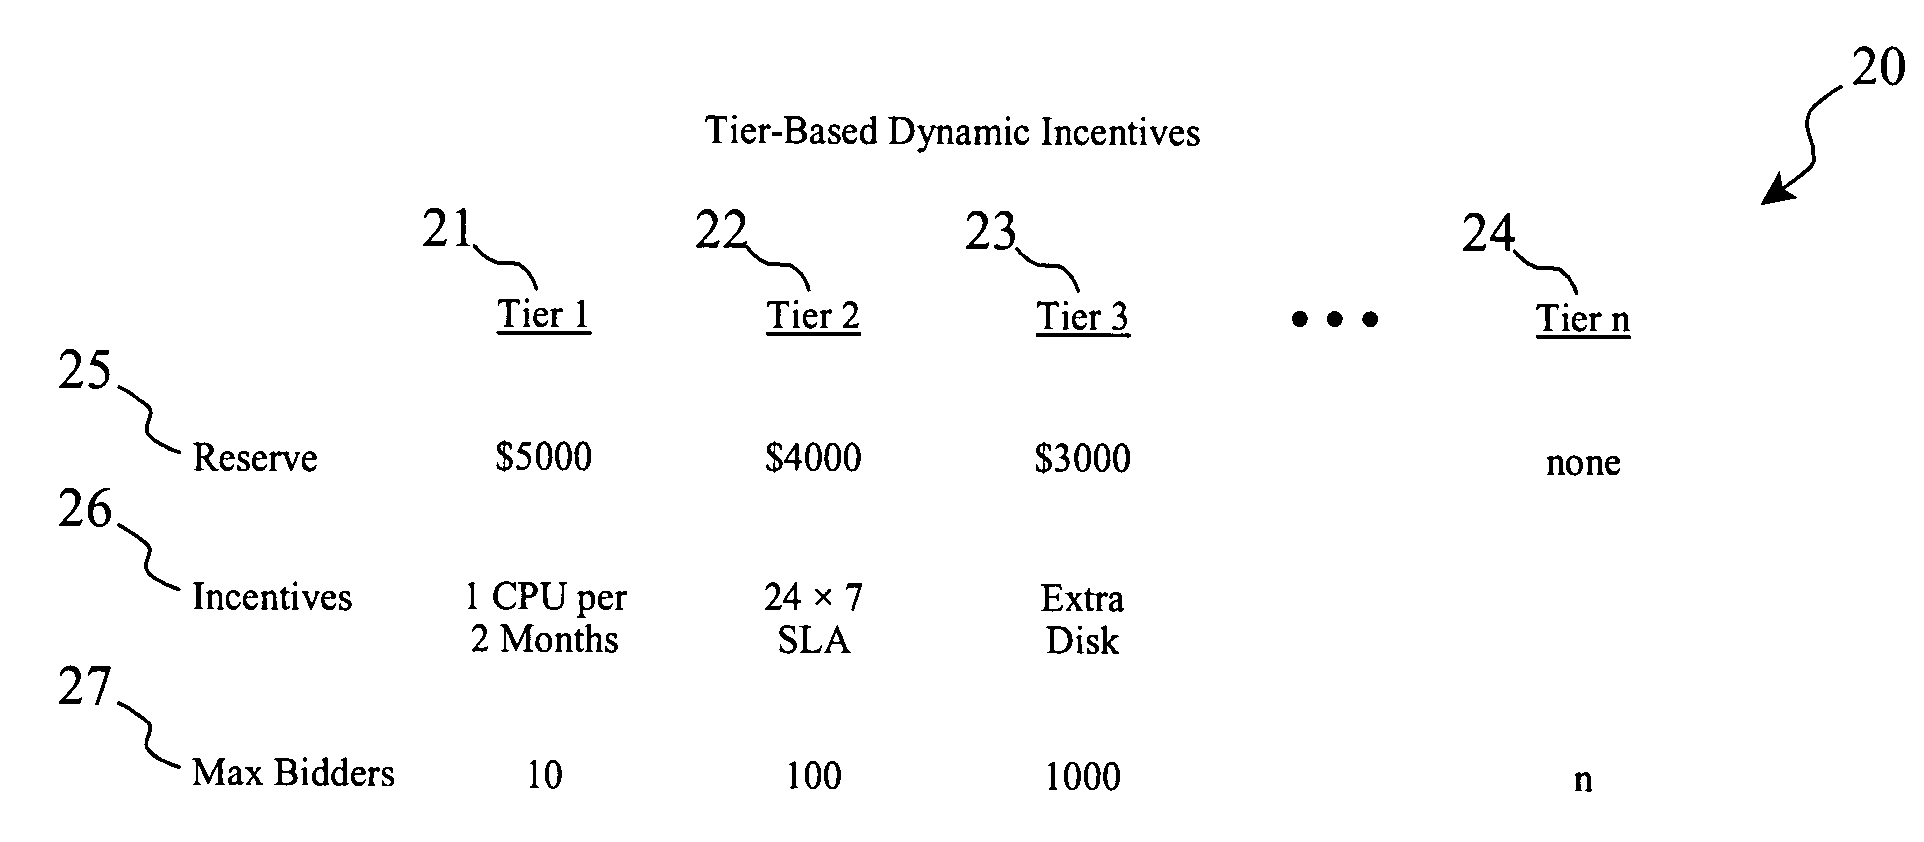 Tier-based dynamic incentive arbitration in an on-demand computing environment